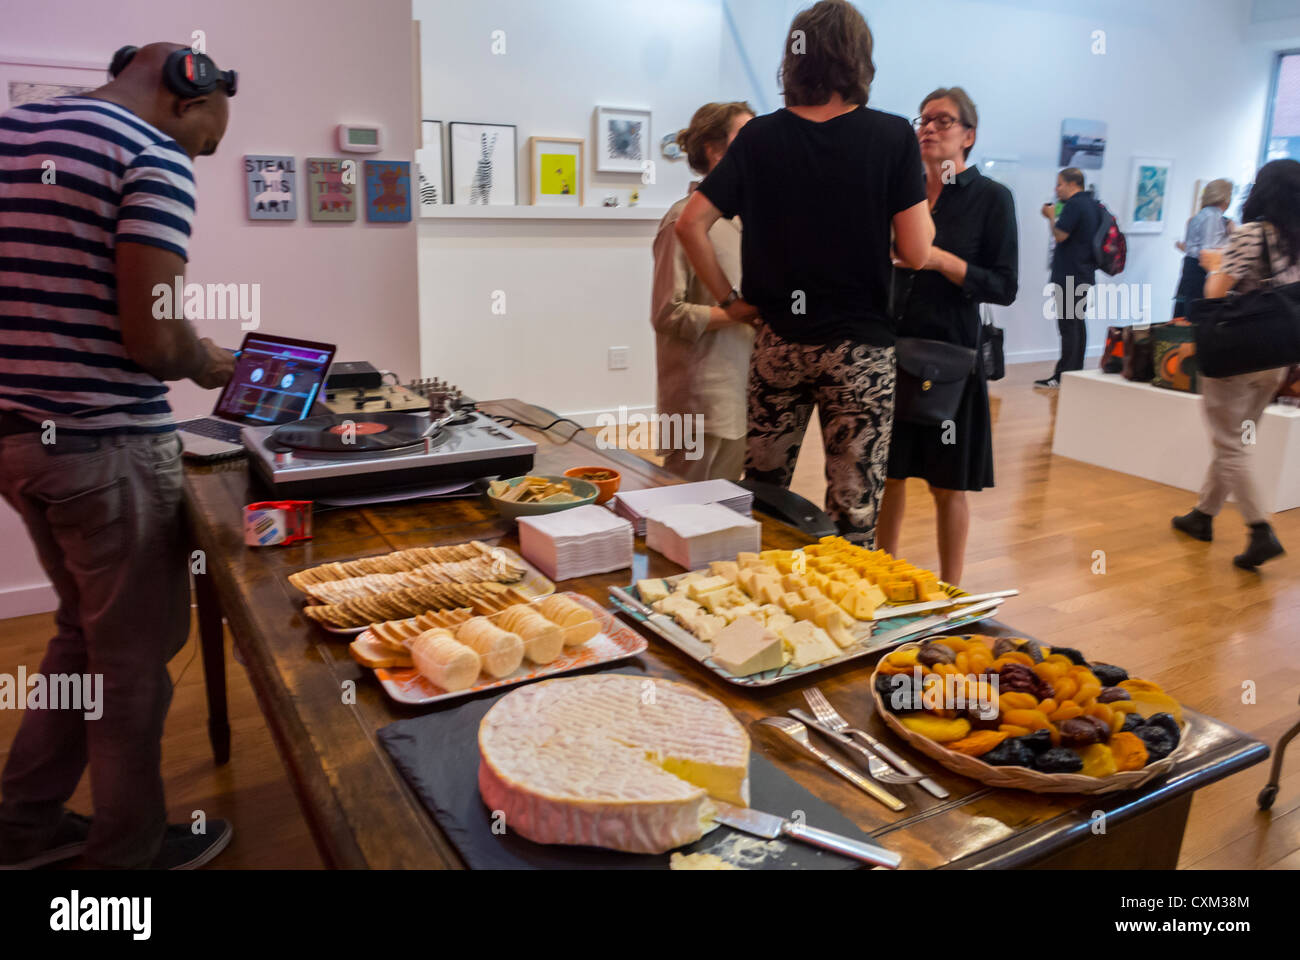 New York City, NY, USA, Besucher der Art Gallery Opening Party 'CollectiCo', in Lower East Side, Manhattan, Party People of different culture Stockfoto